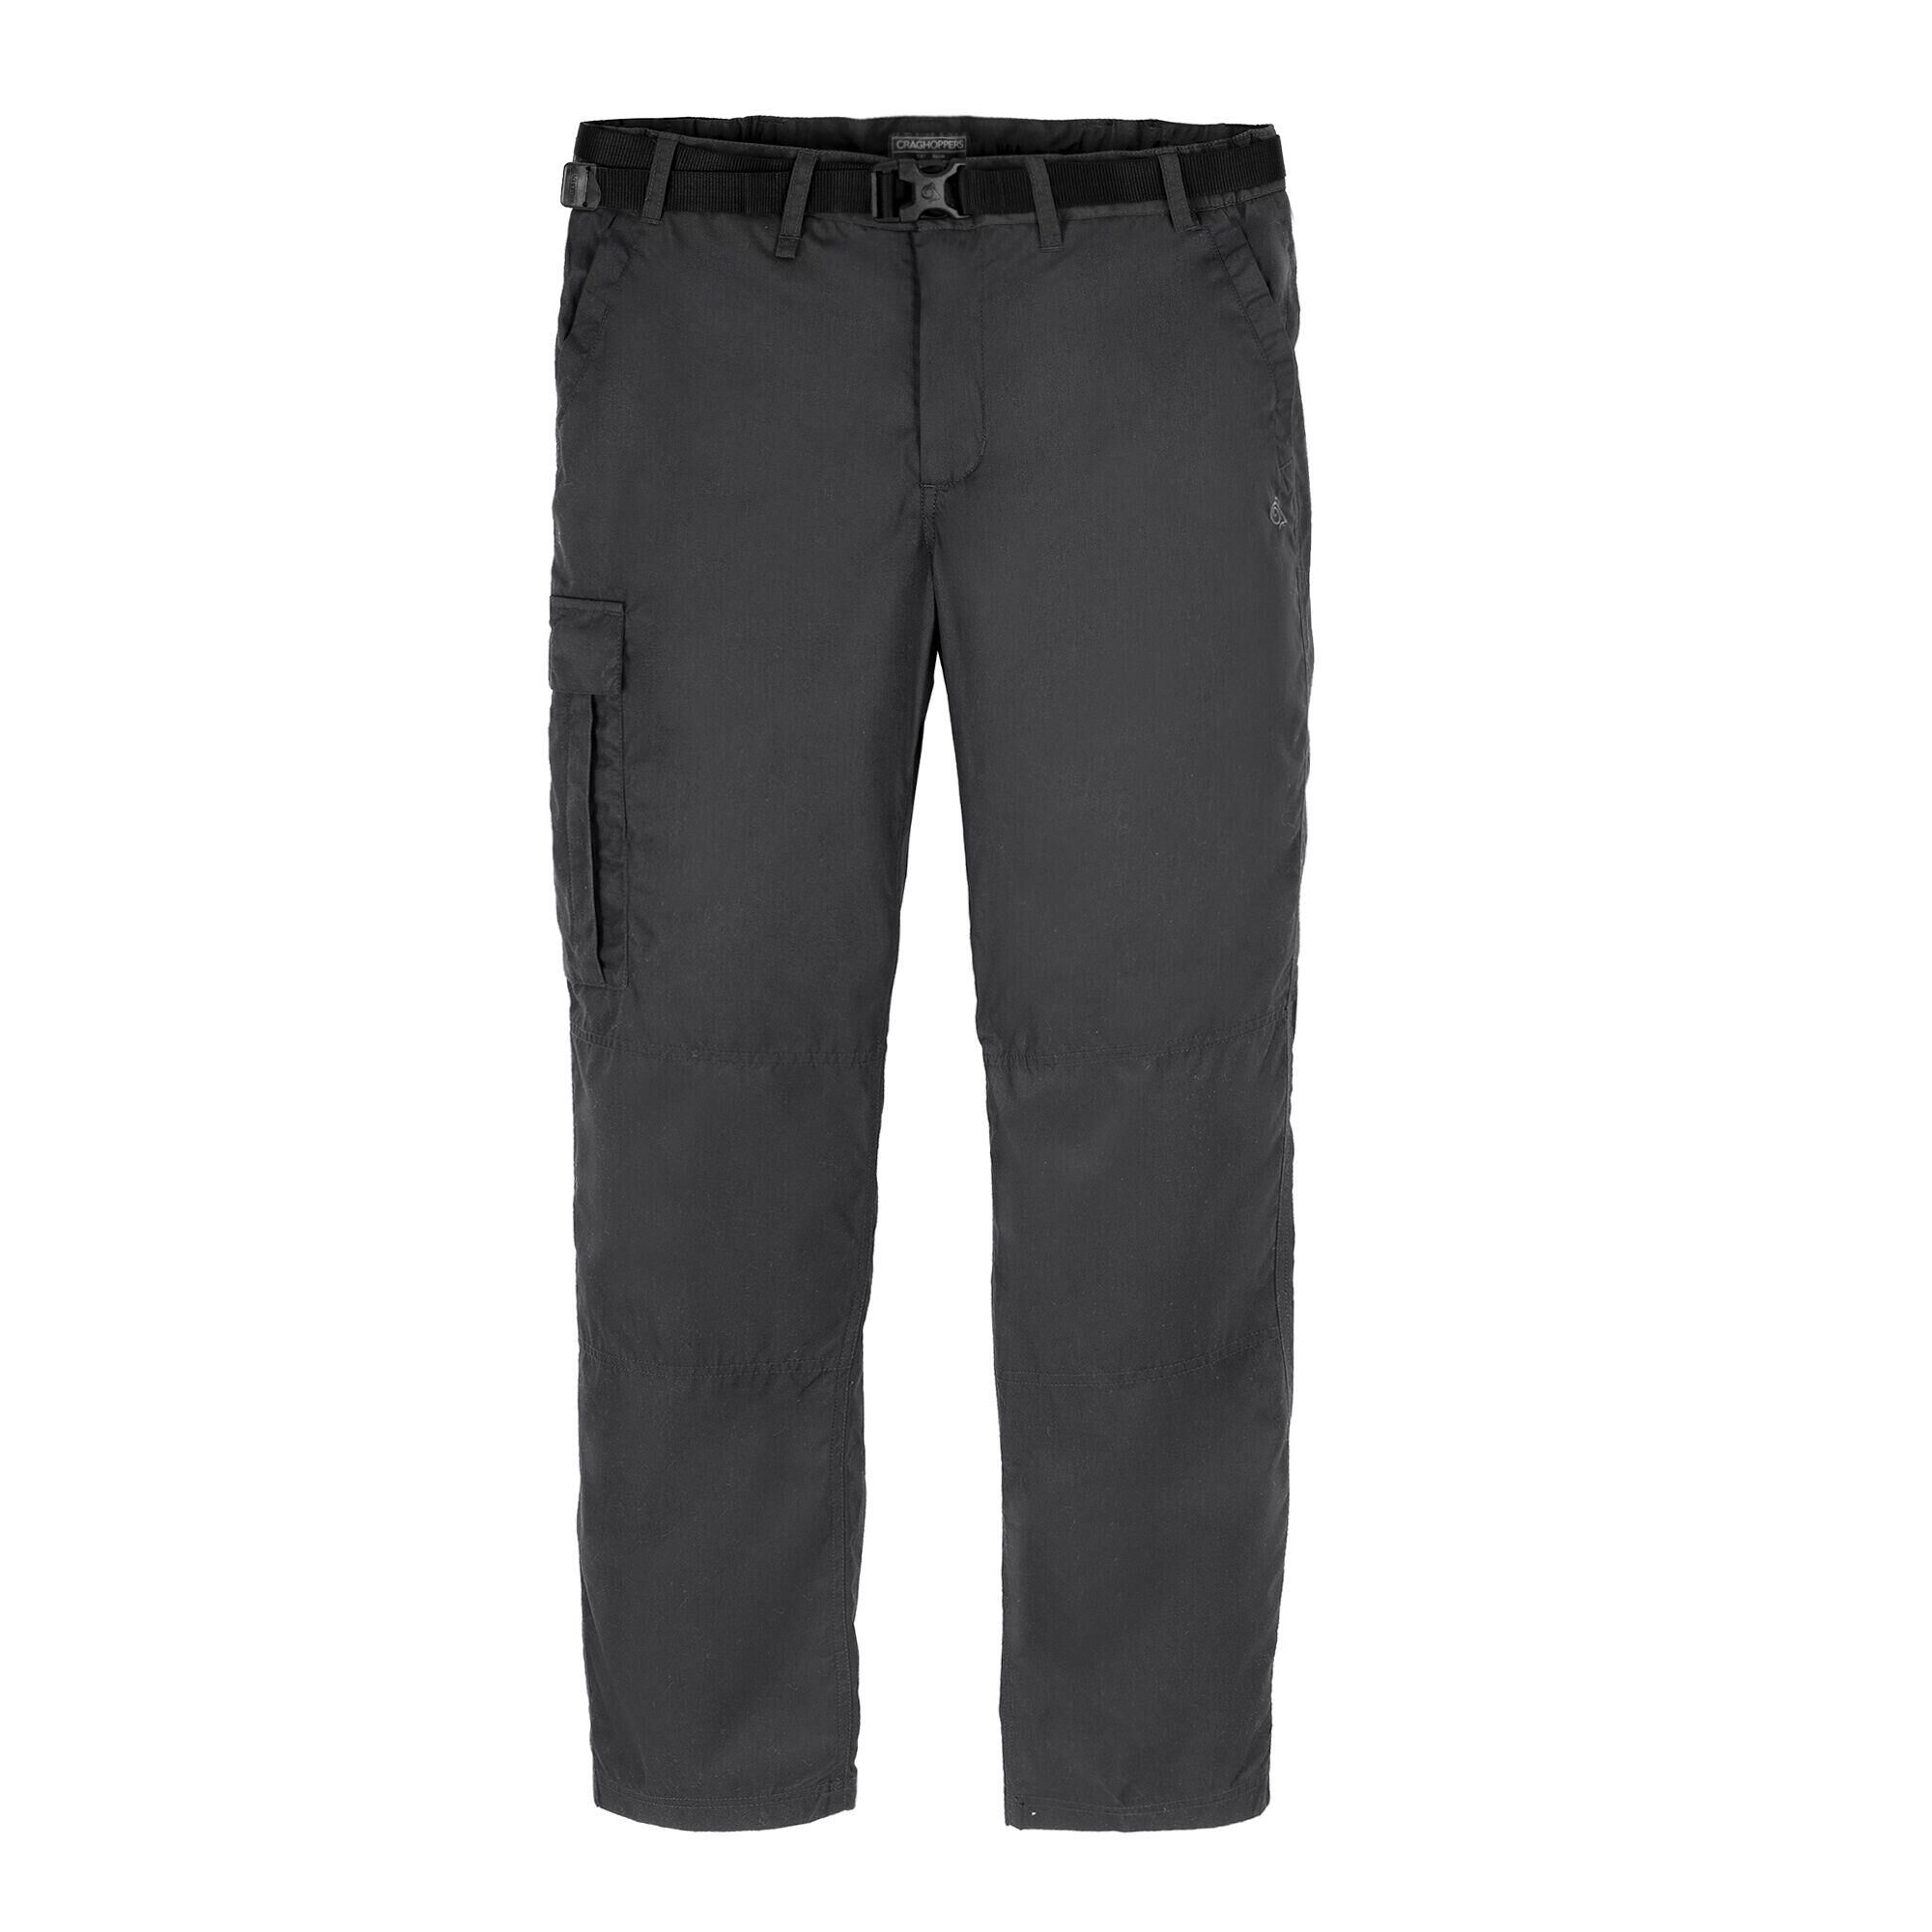 CRAGHOPPERS Men's Expert Kiwi Tailored Trousers